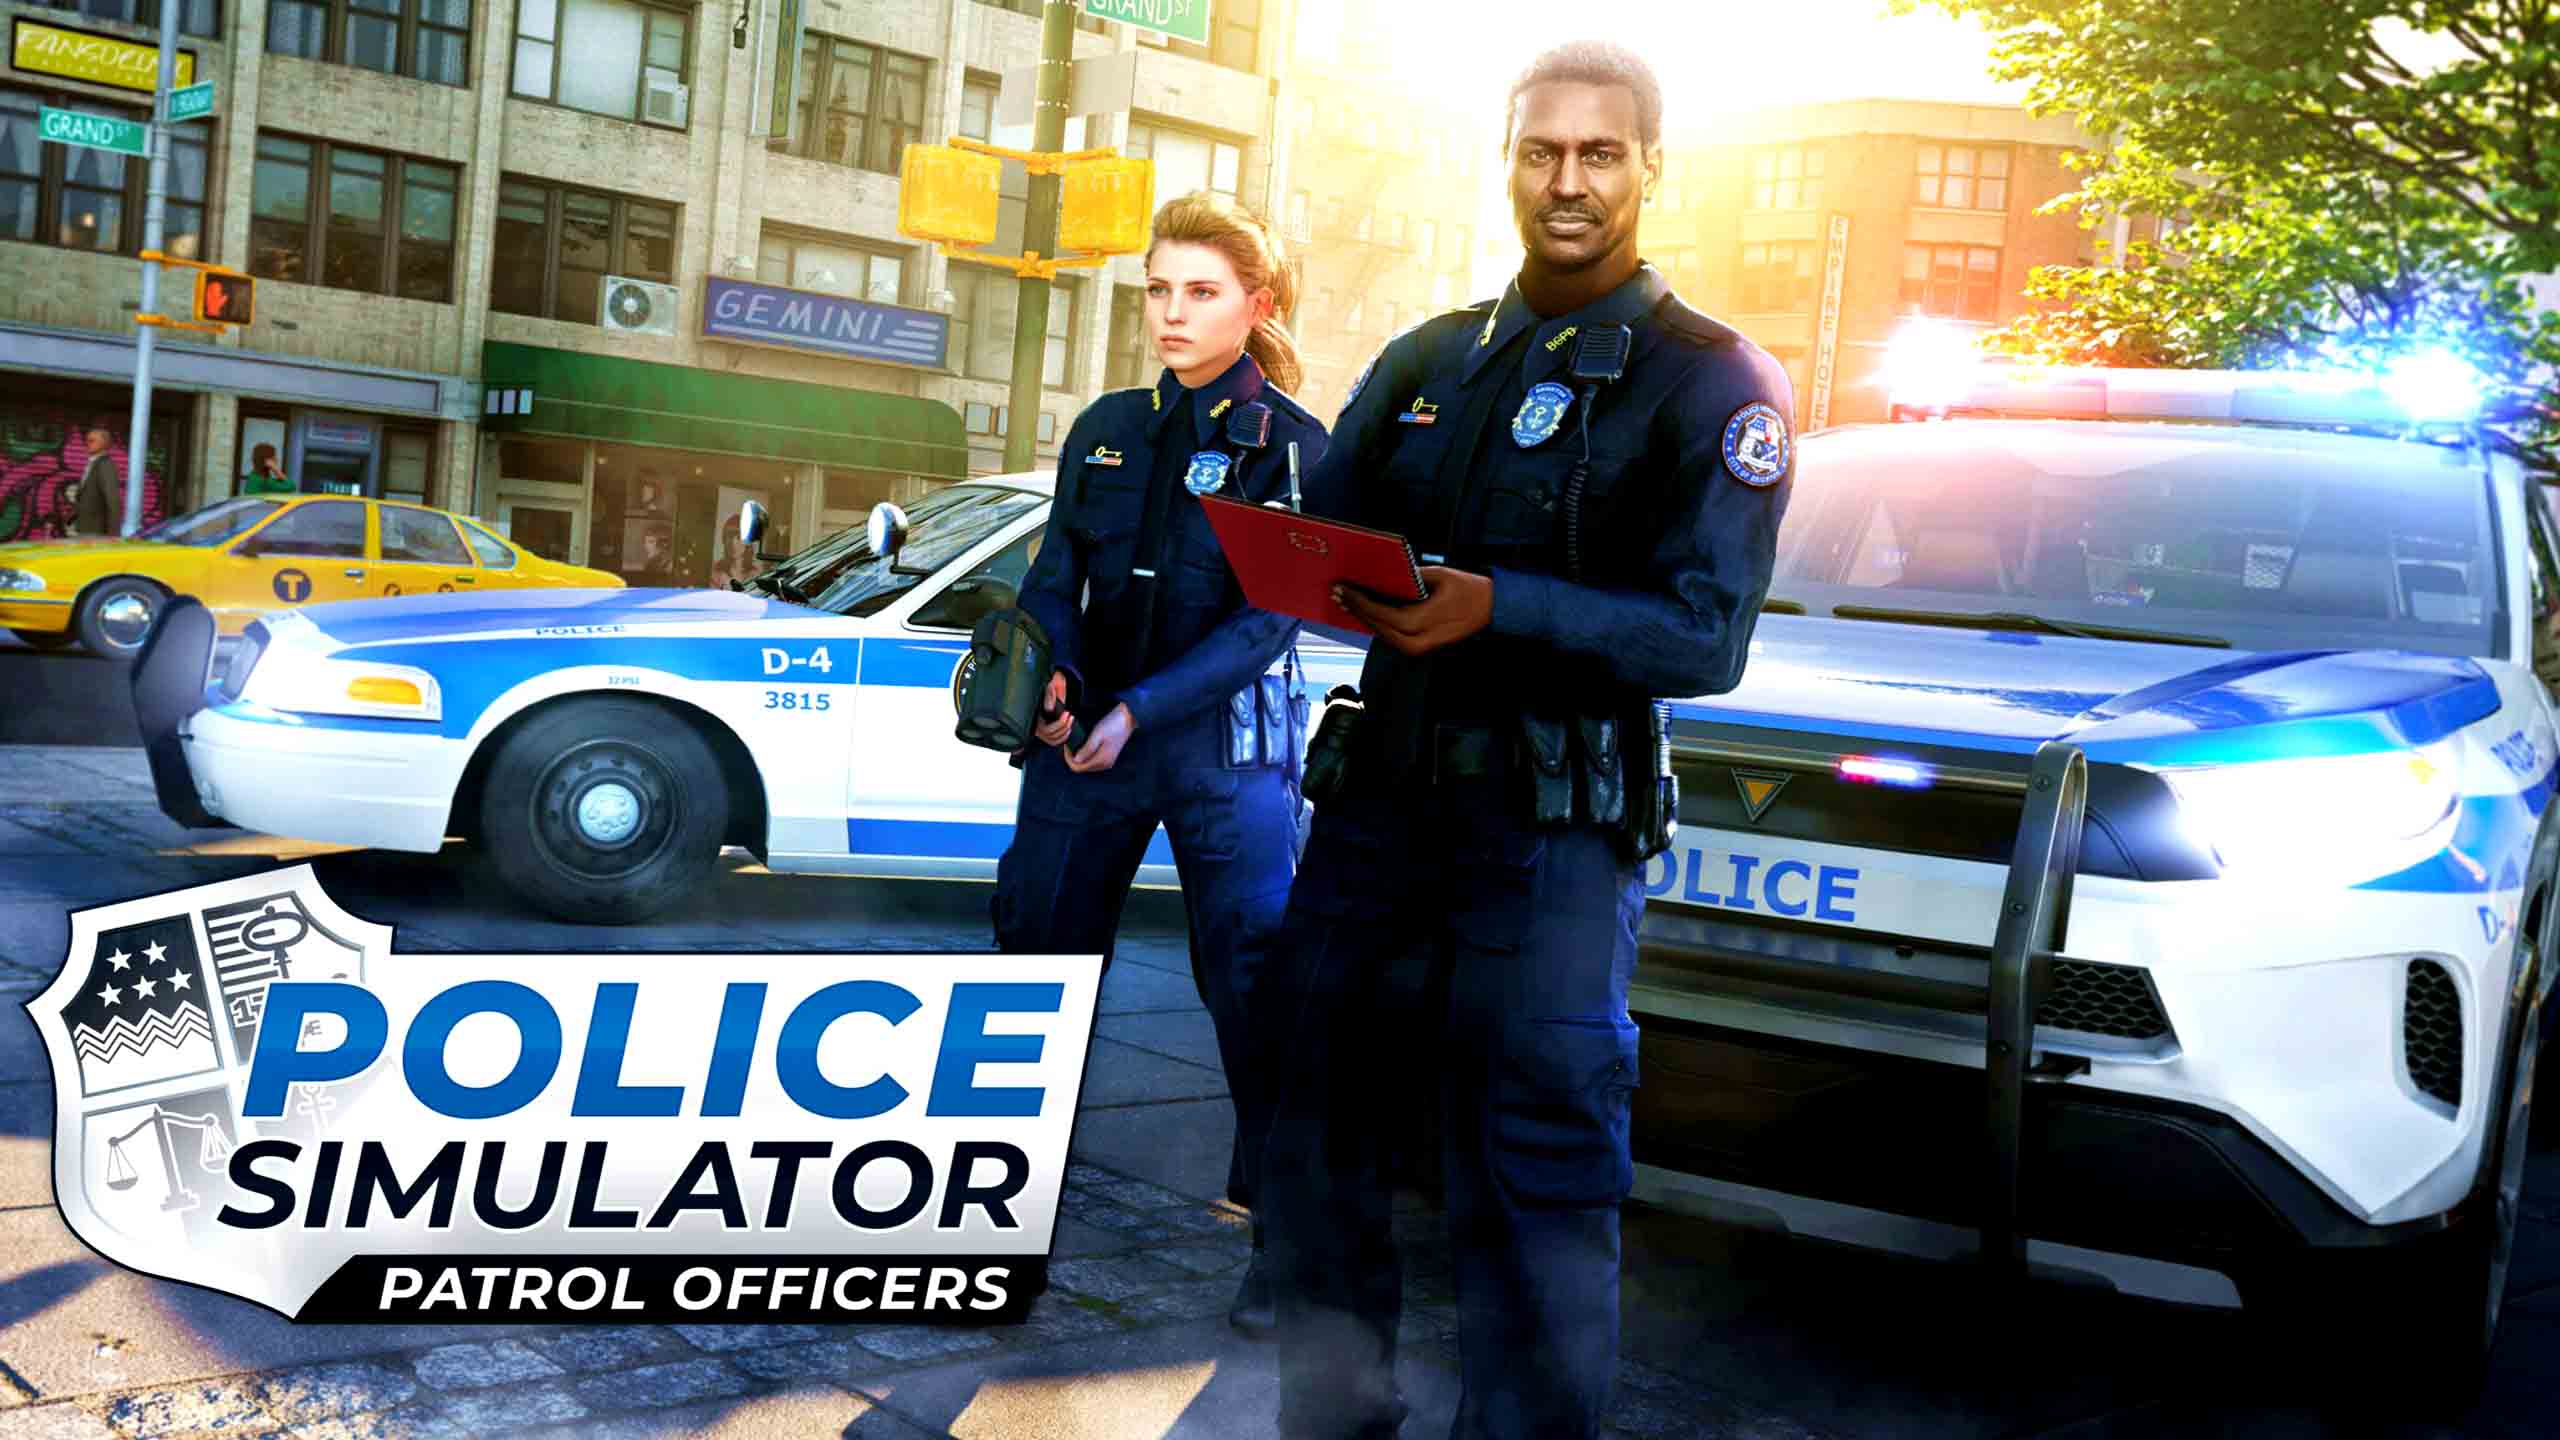 Police Simulator Patrol Officers Police Simulation Soon To Be Released For Consoles 